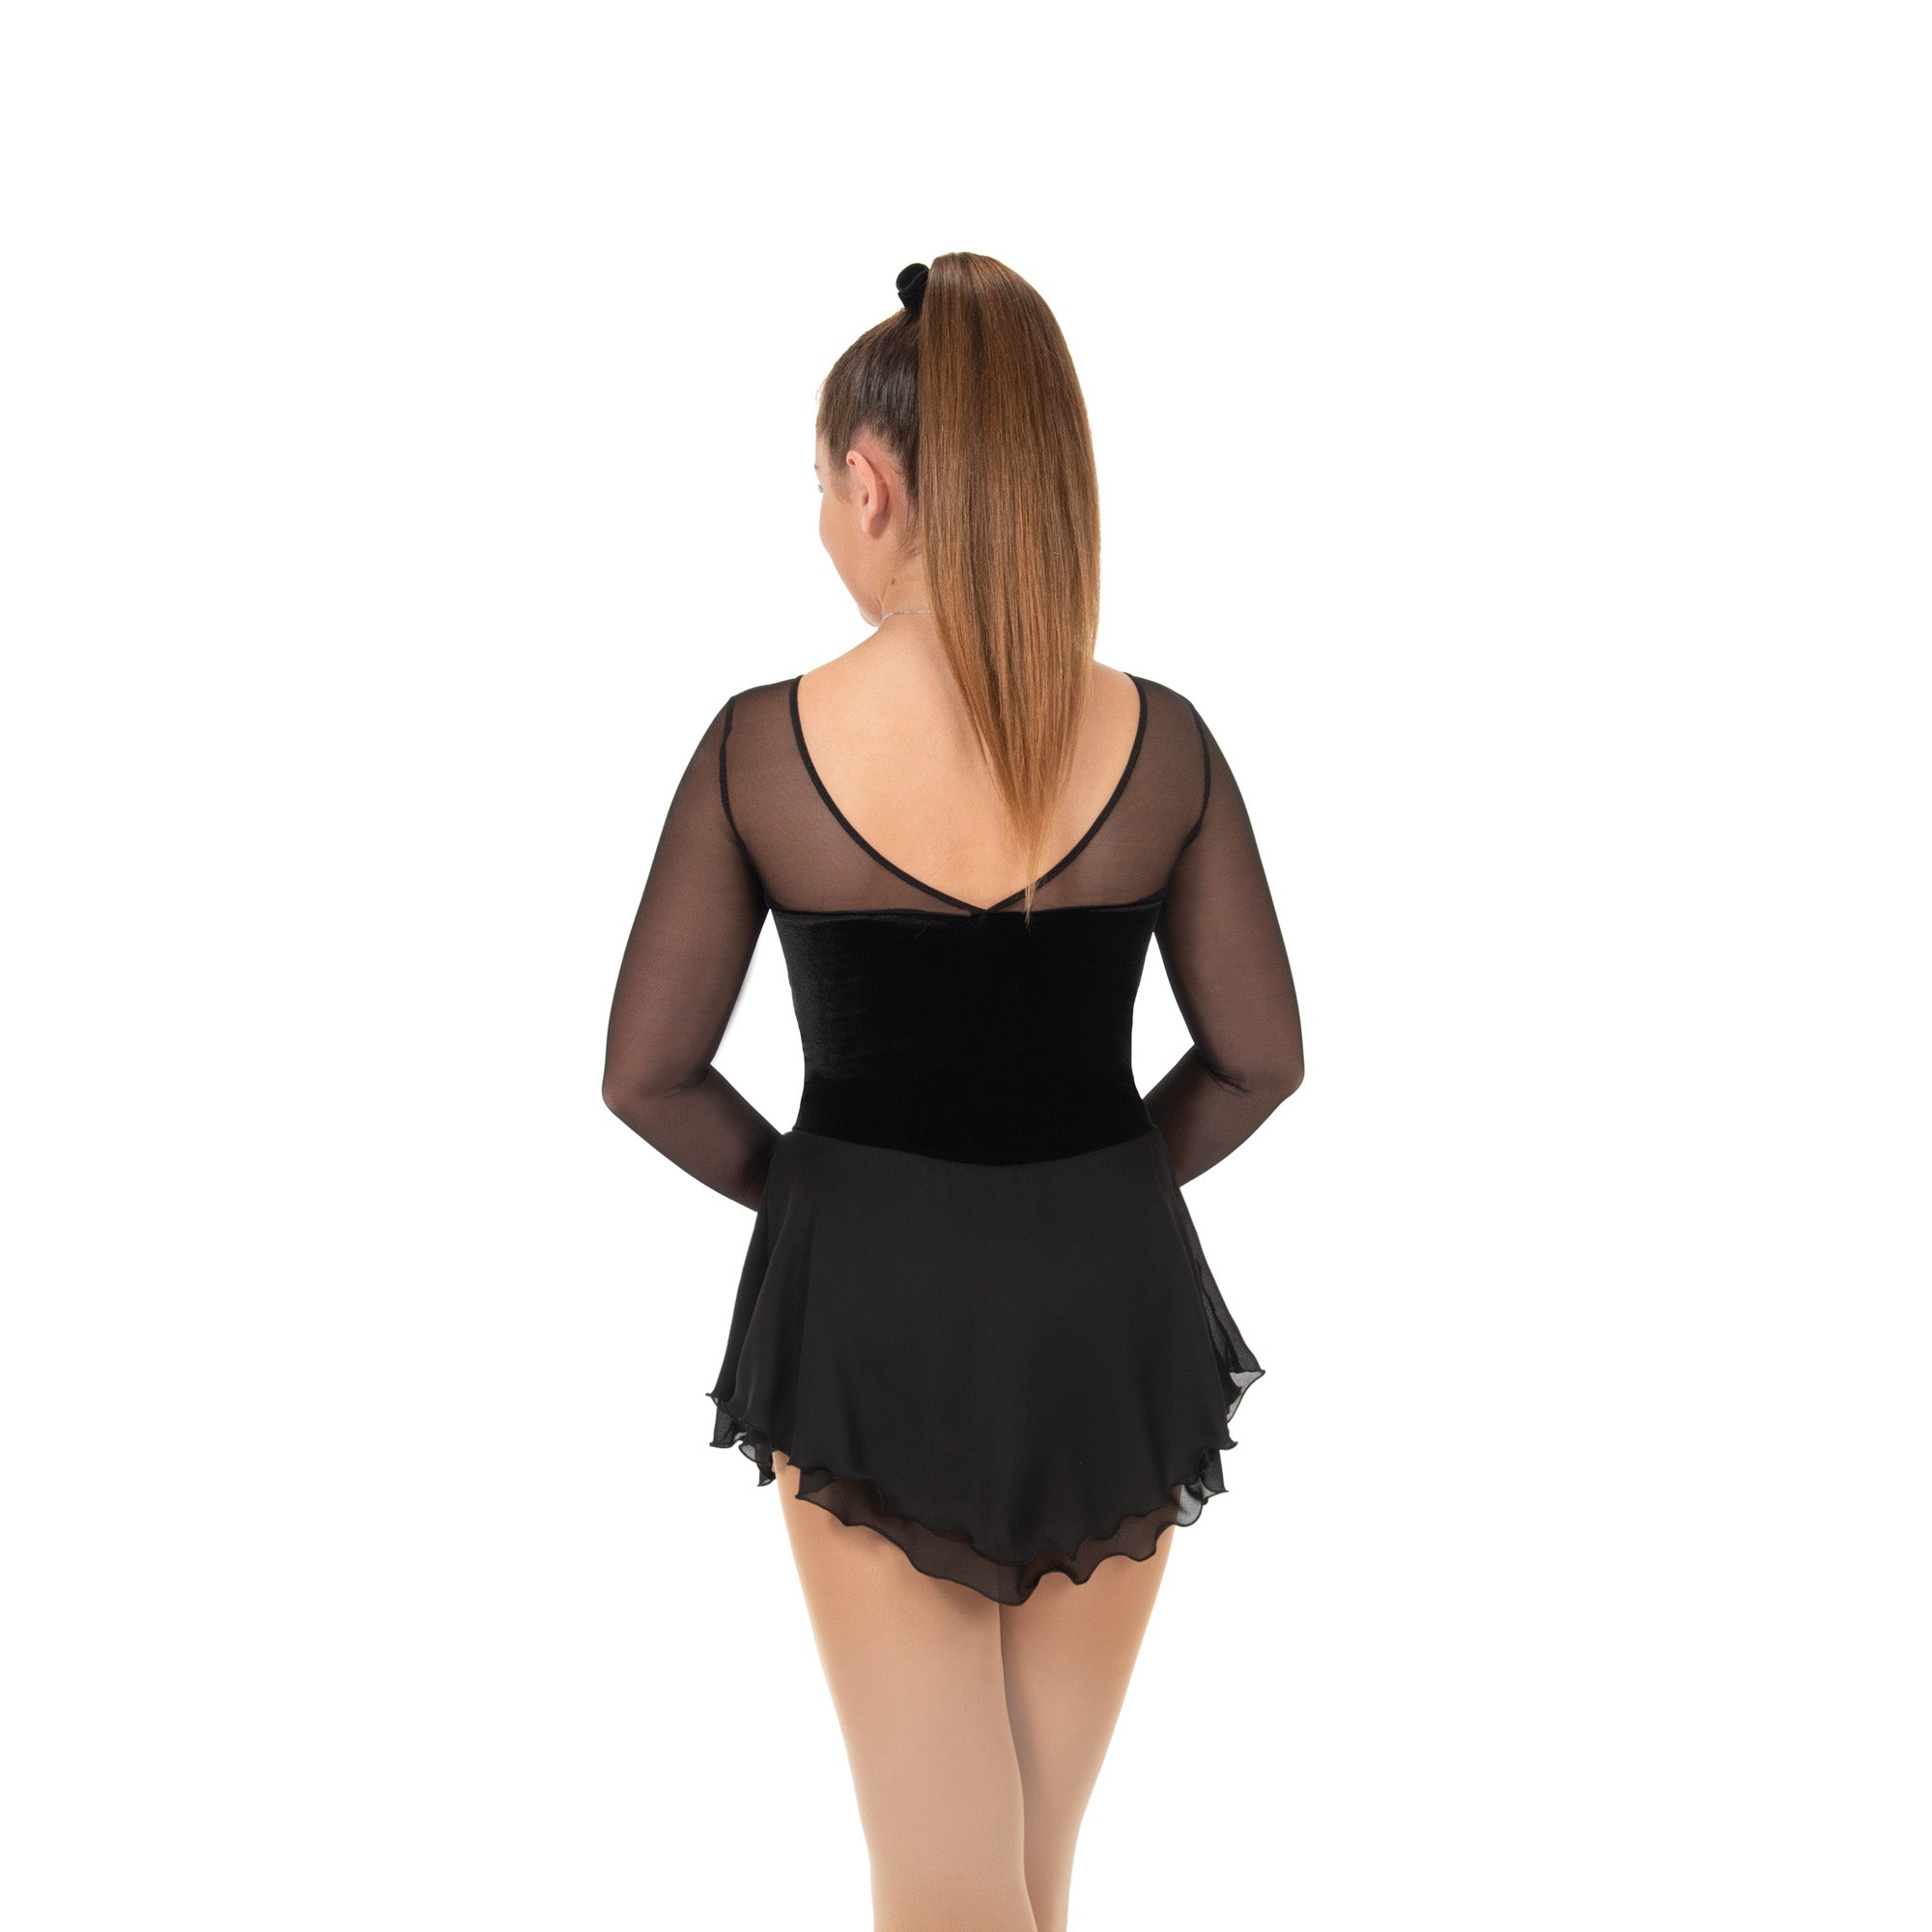 87 Classique Skating Dress in Black by Jerry's